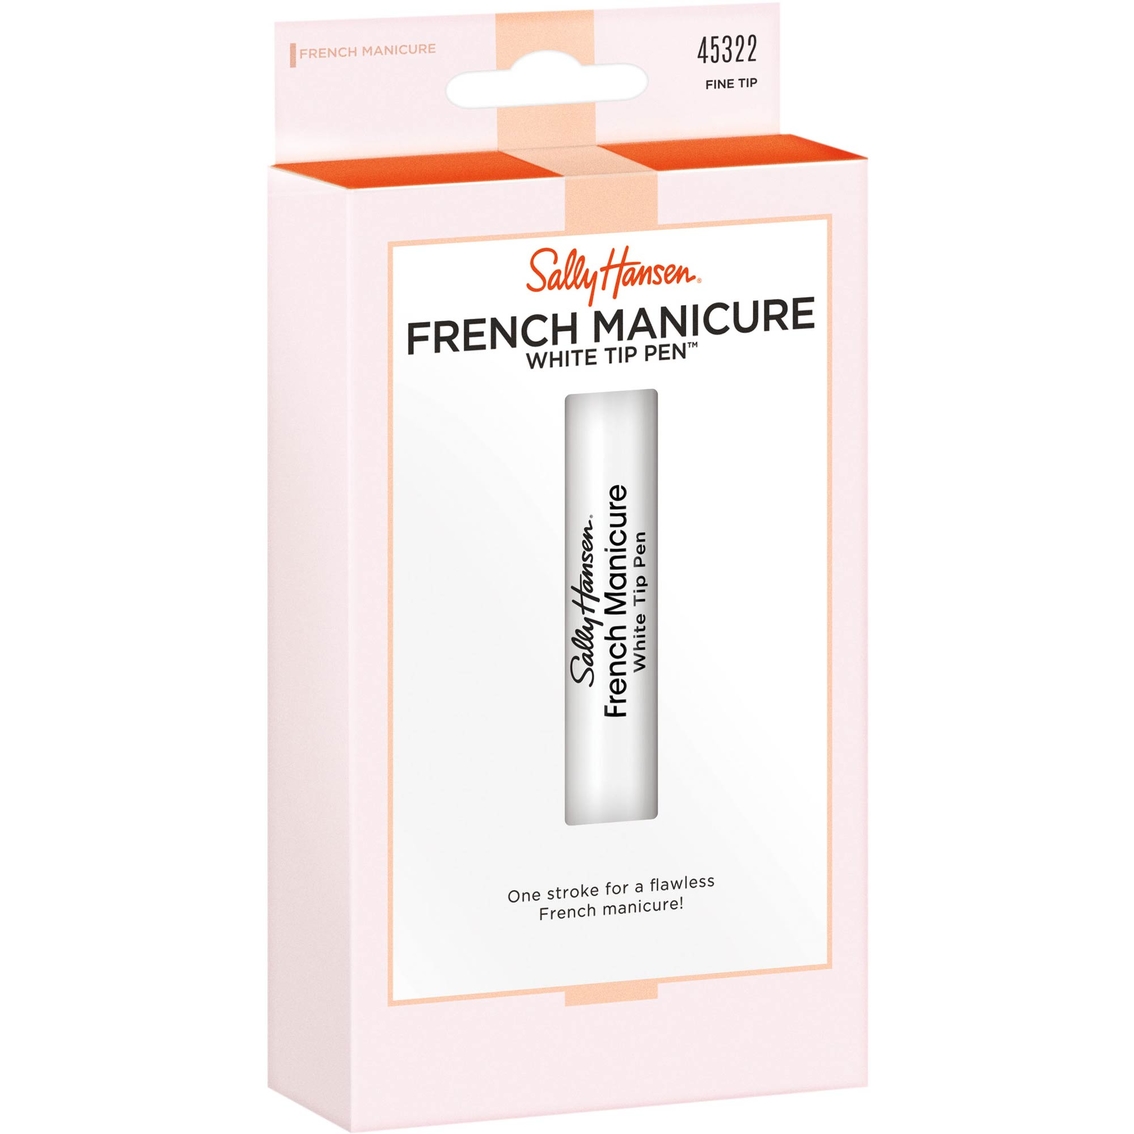 Sally Hansen French Manicure White Tip Pen - Image 2 of 3